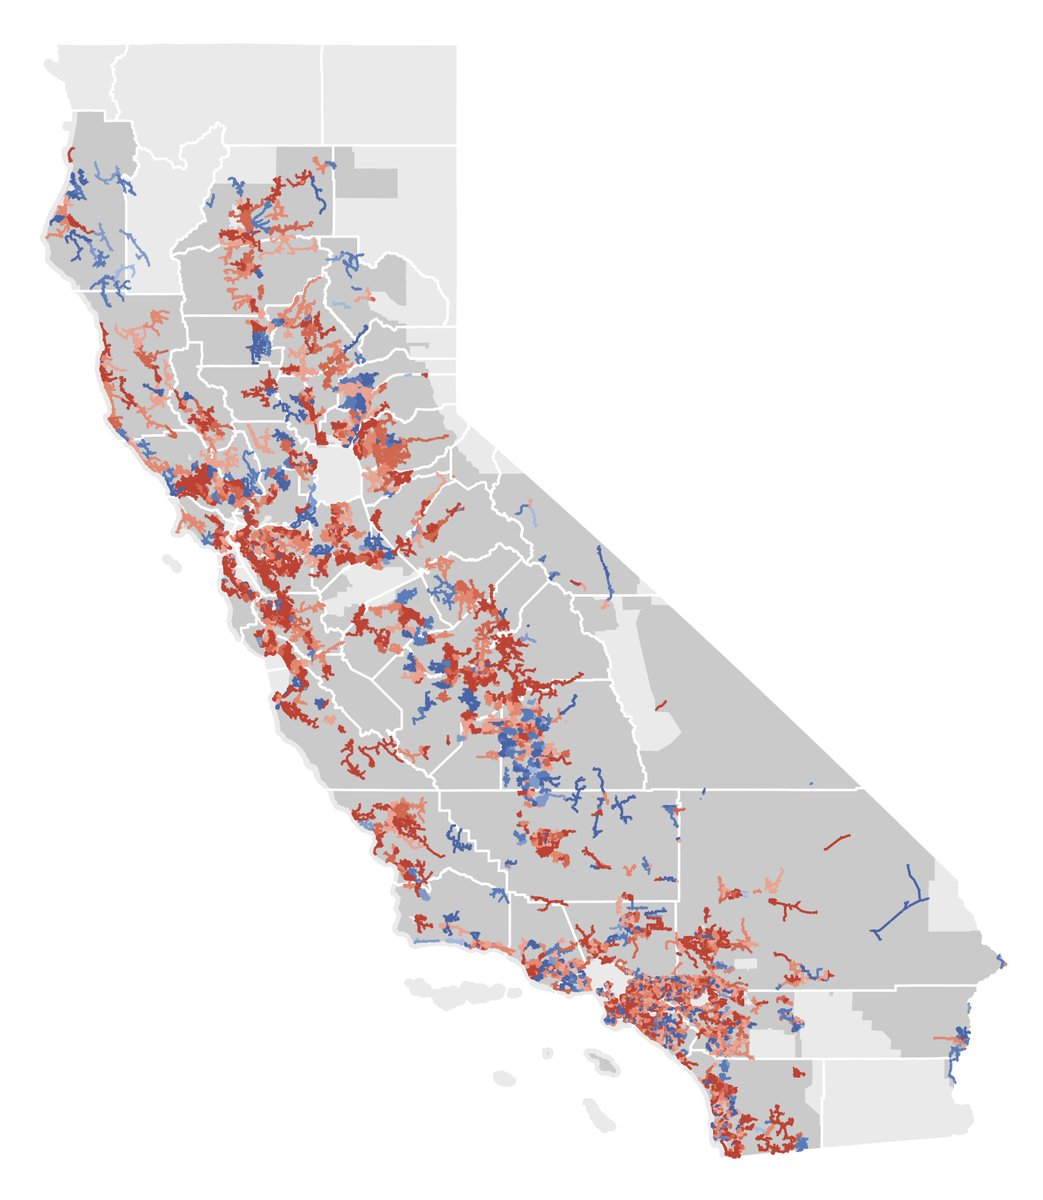 California’s electricity grid will require up to $20 billion in capacity upgrades to handle the new load from EVs. Meanwhile, the price of electricity is likely to fall by $0.01–$0.06 per kwh, due to the growth in electricity consumption. In PNAS: ow.ly/xflT50RojXq